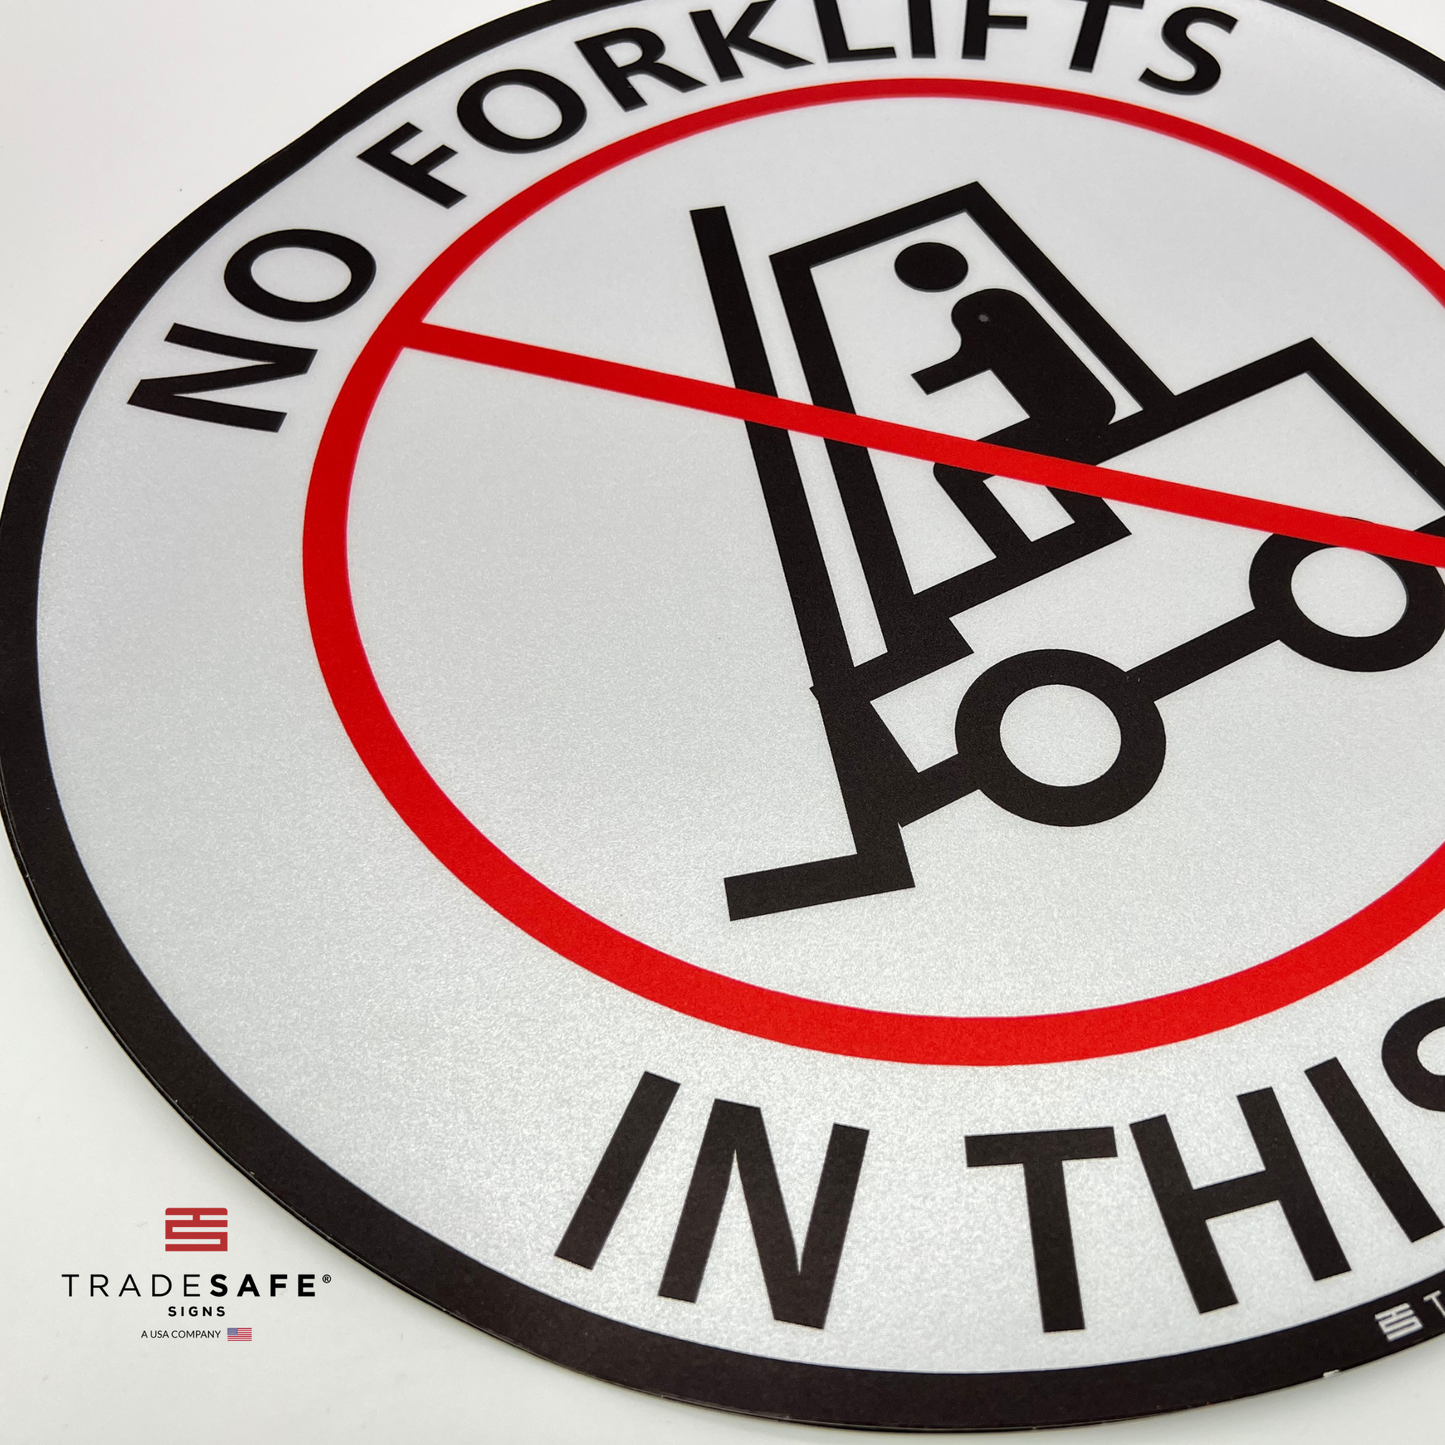 close-up of no forklifts in this area sign